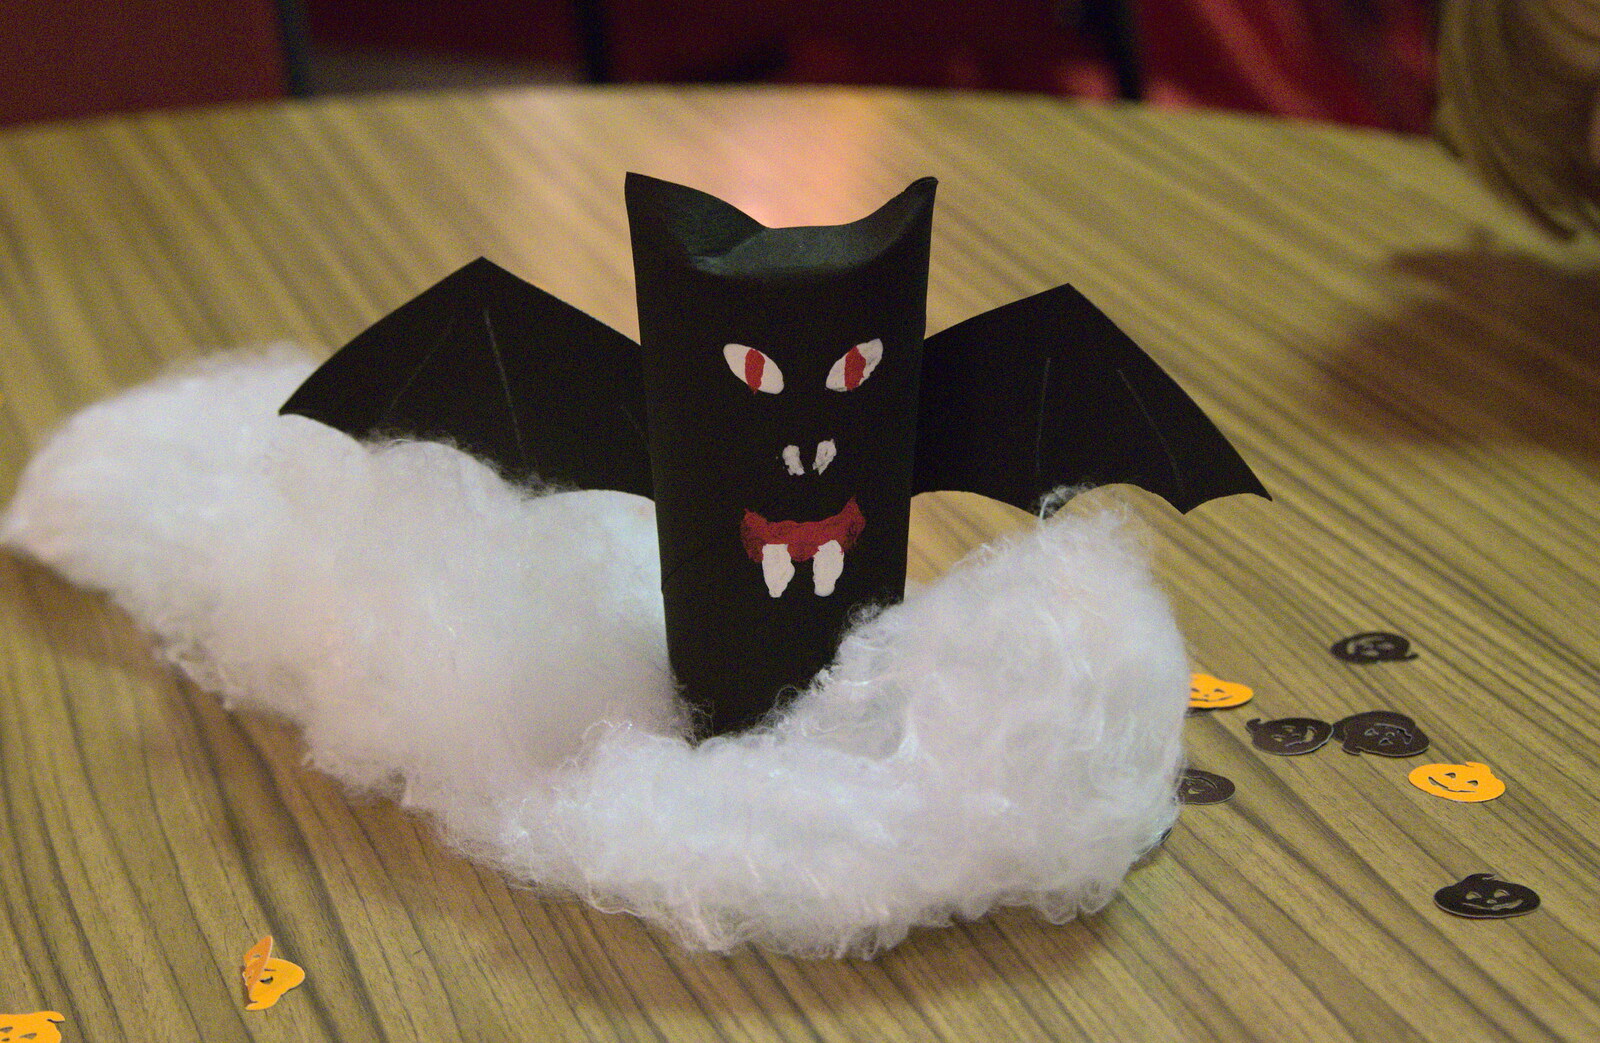 A bat made out of a bog roll from A Halloween Party at the Village Hall, Brome, Suffolk - 31st October 2014